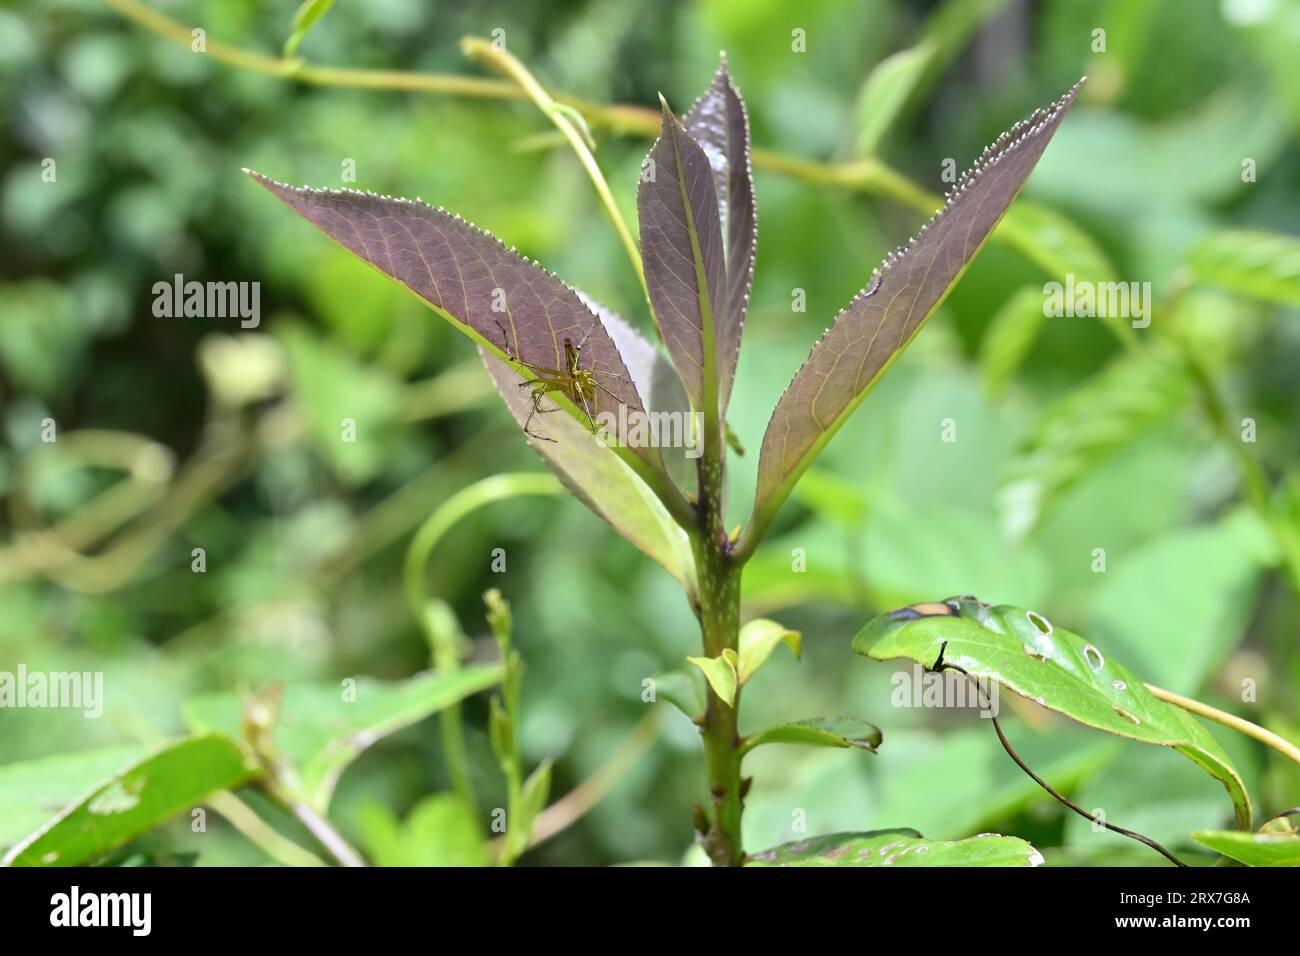 A spiky lynx spider on a side of a freshly growing leaf of a Symplocos cochinchinensis plant in a wild area Stock Photo